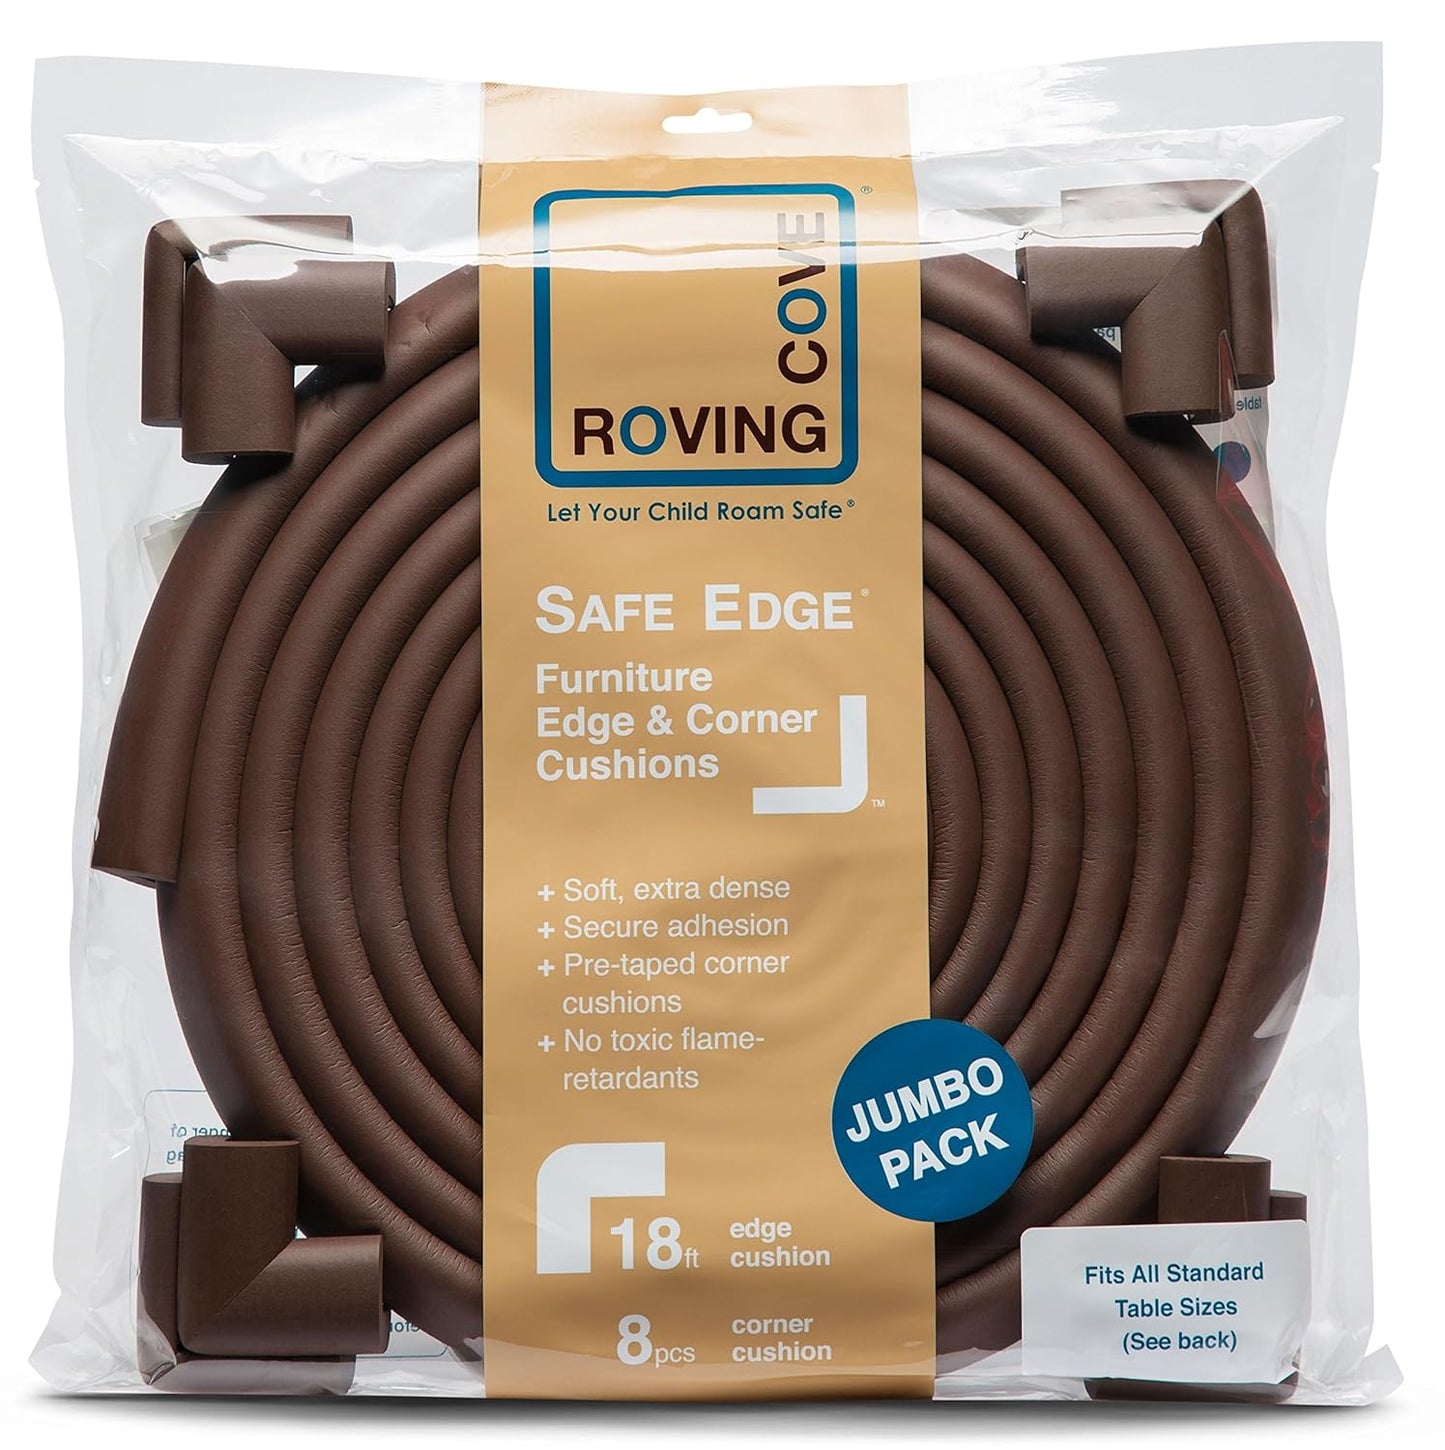 Roving Cove Edge Corner Protector Baby Proofing (Large 18ft Edge 8 Corners), Hefty-Fit Heavy-Duty, Soft NBR Rubber Foam, Furniture Fireplace Safety Corner Edge Bumper Guard, 3M Adhesive, Oyster White